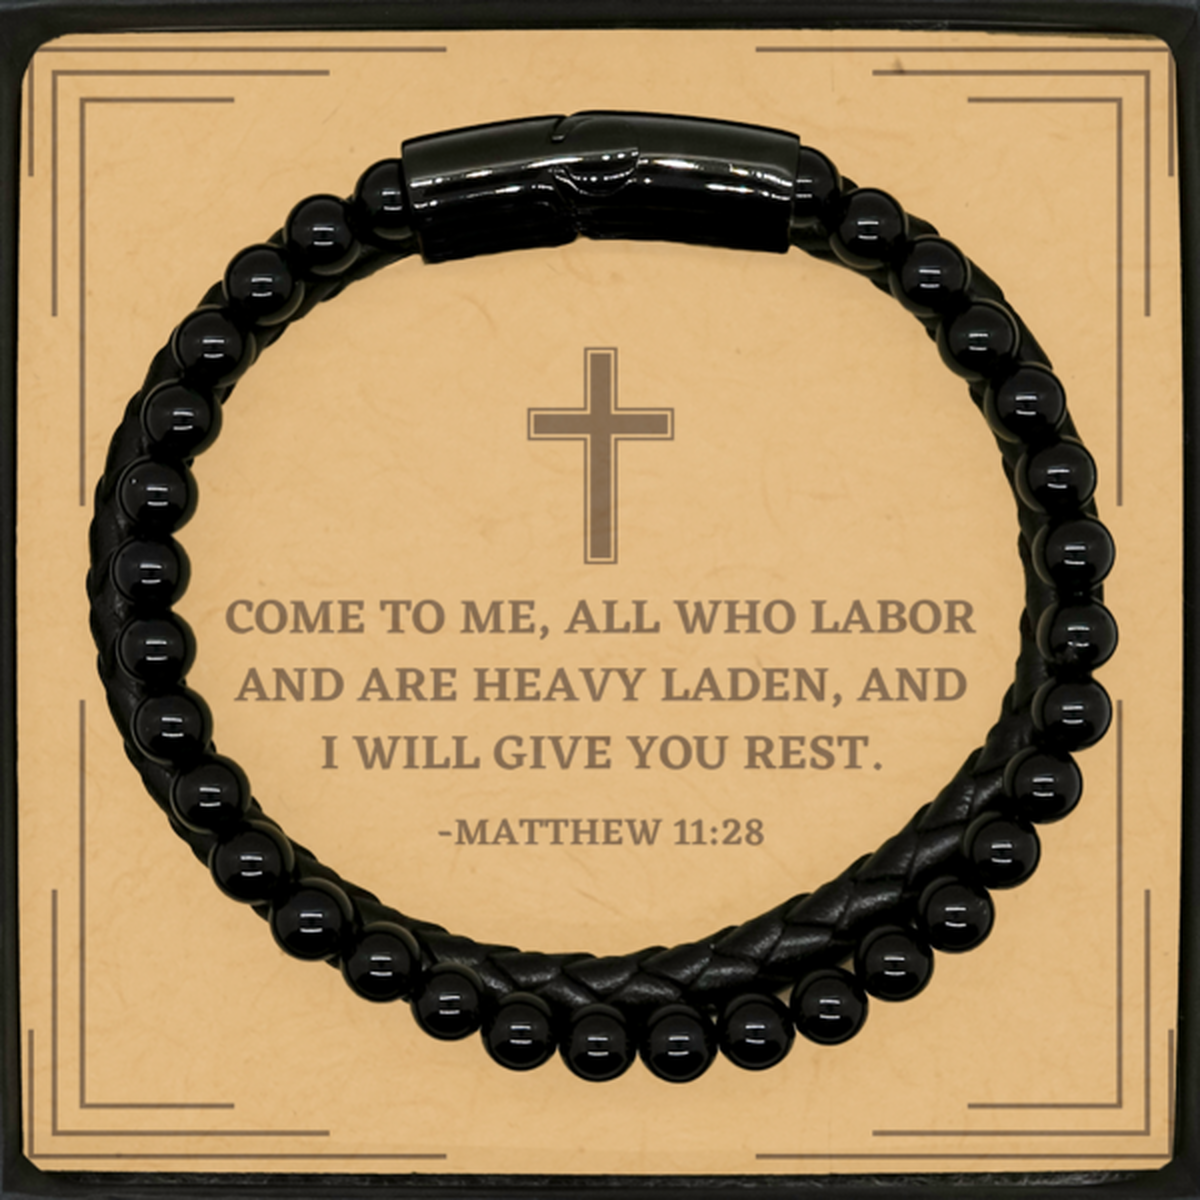 Baptism Gifts For Teenage Boys Girls, Christian Bible Verse Stone Leather Bracelet, Come to me, all who labor, Confirmation Gifts, Bible Verse Card for Son, Godson, Grandson